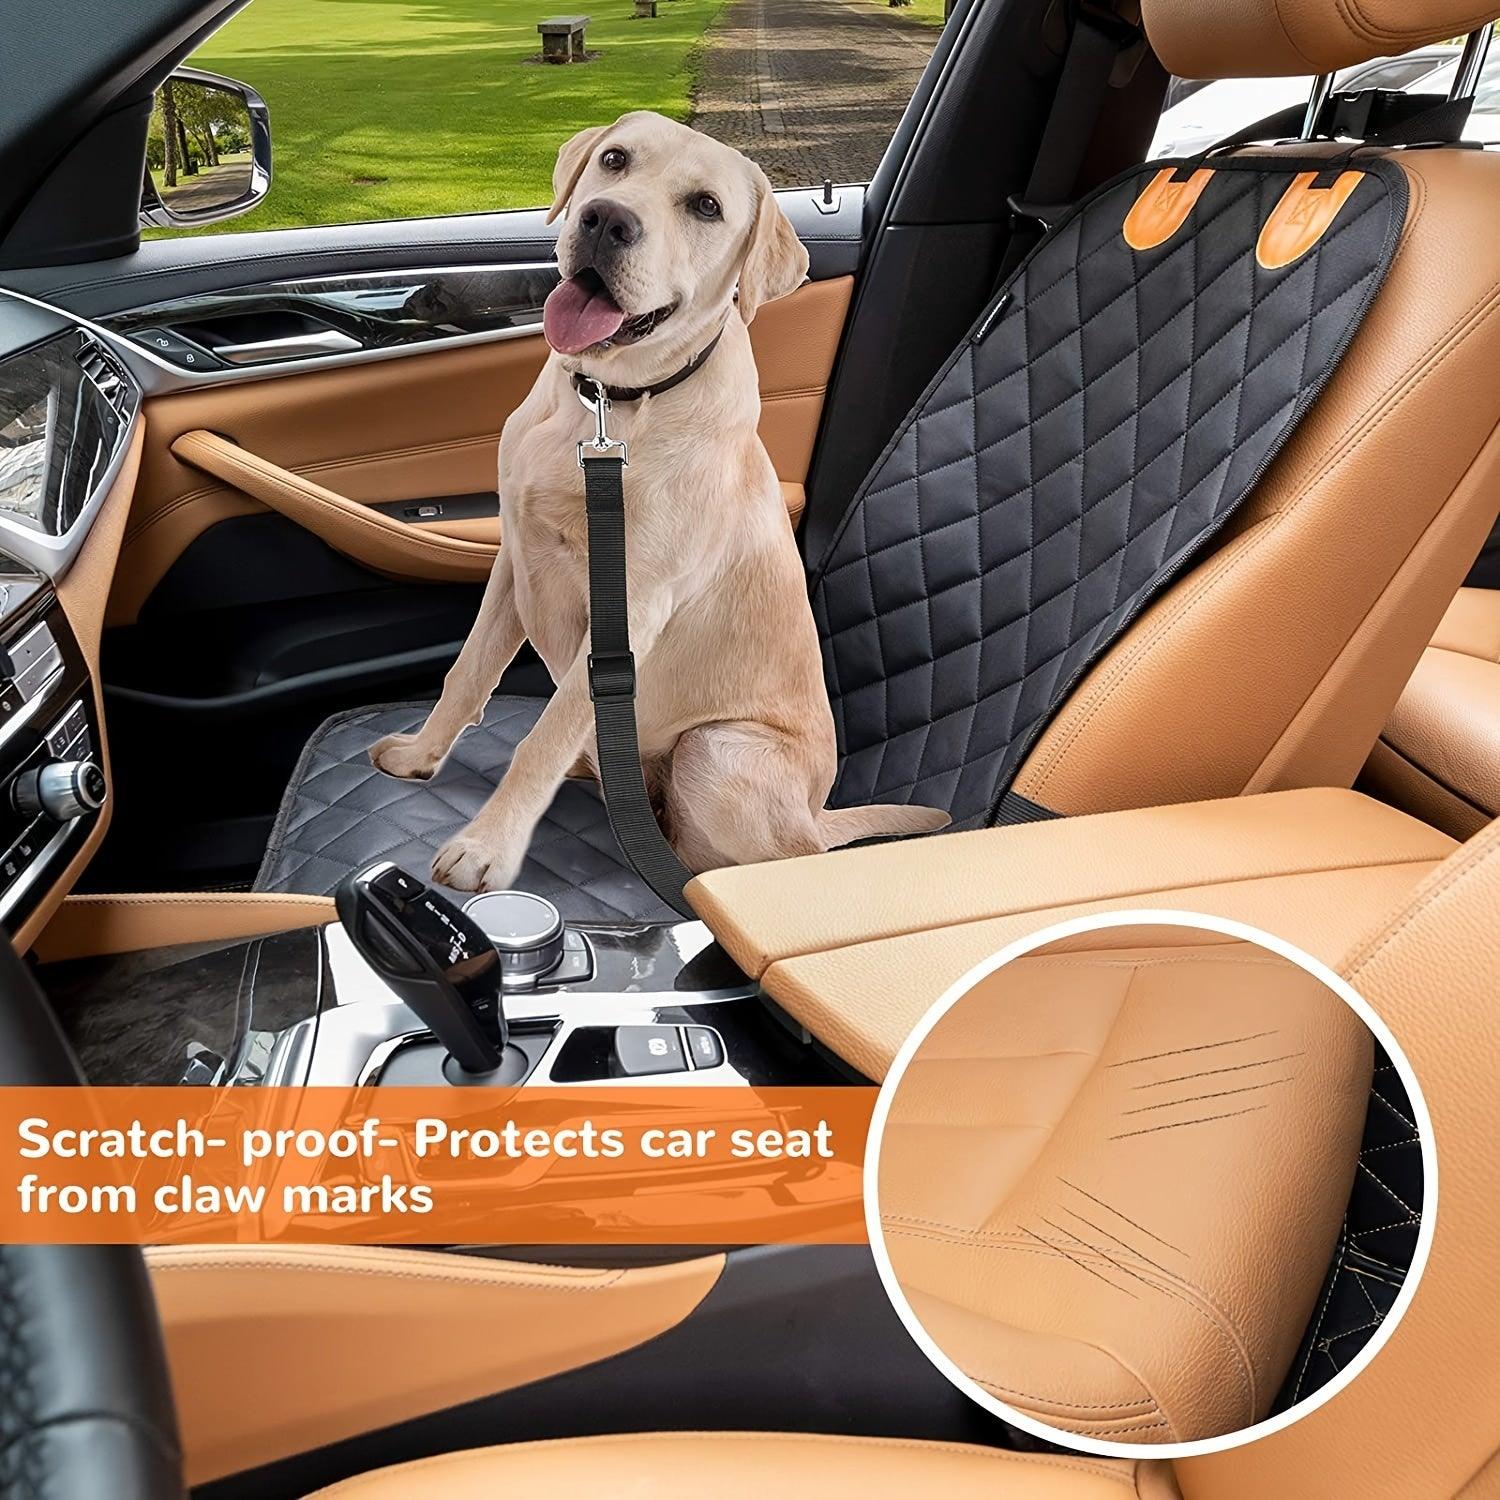 Waterproof Scratchproof Dog Front Car Seat Cover for Pets, Car Seat Protector for Dogs